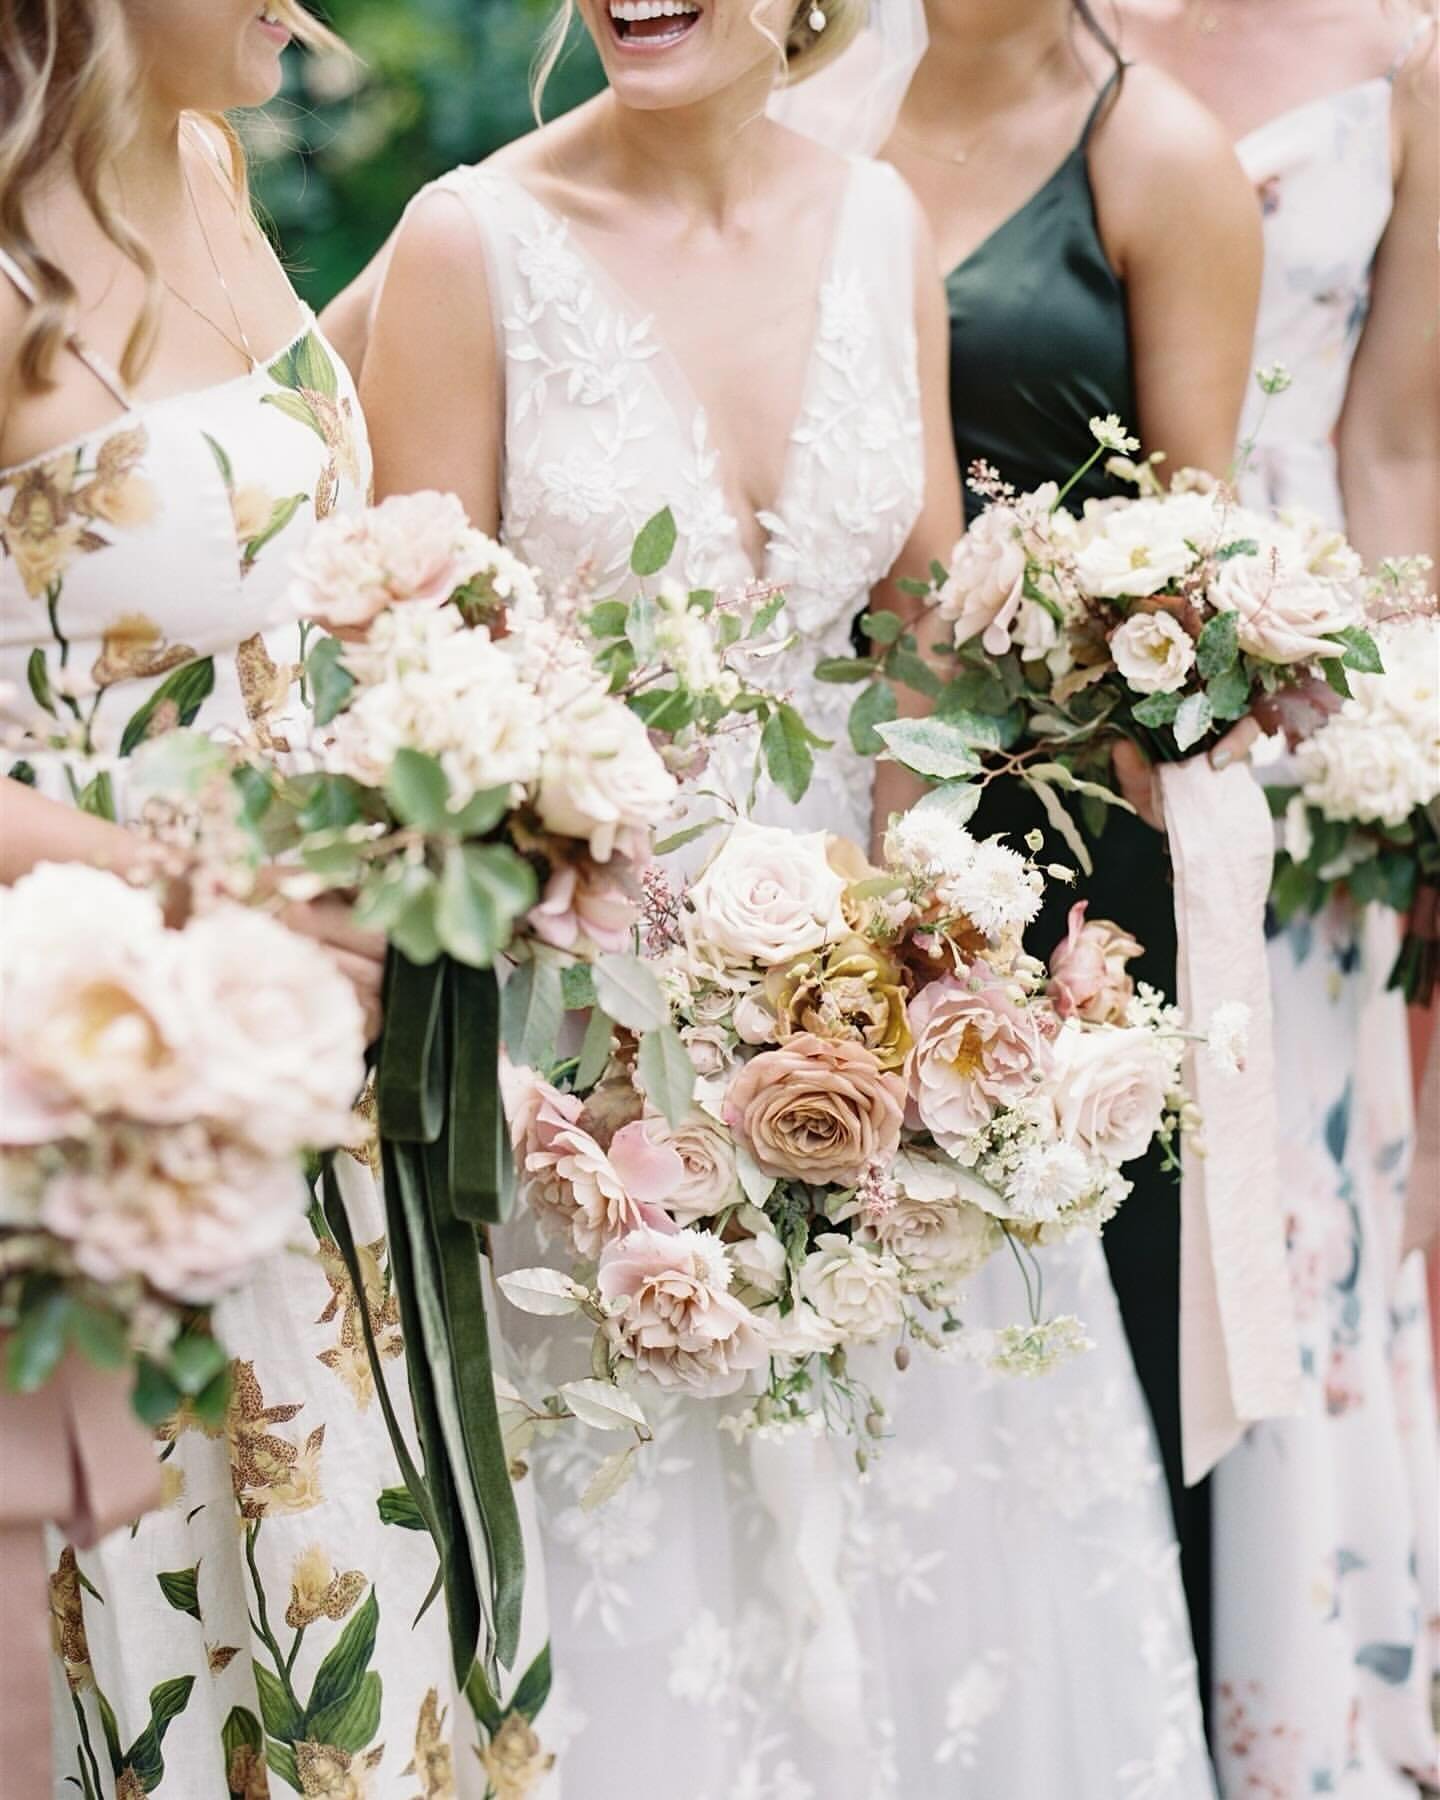 April showers bring May flowers! And as we get even closer to flower season here at the farm, we are celebrating the talented florists who make your color palette dreams come true! Like these muted pastels to match the floral bridesmaid dresses by @k